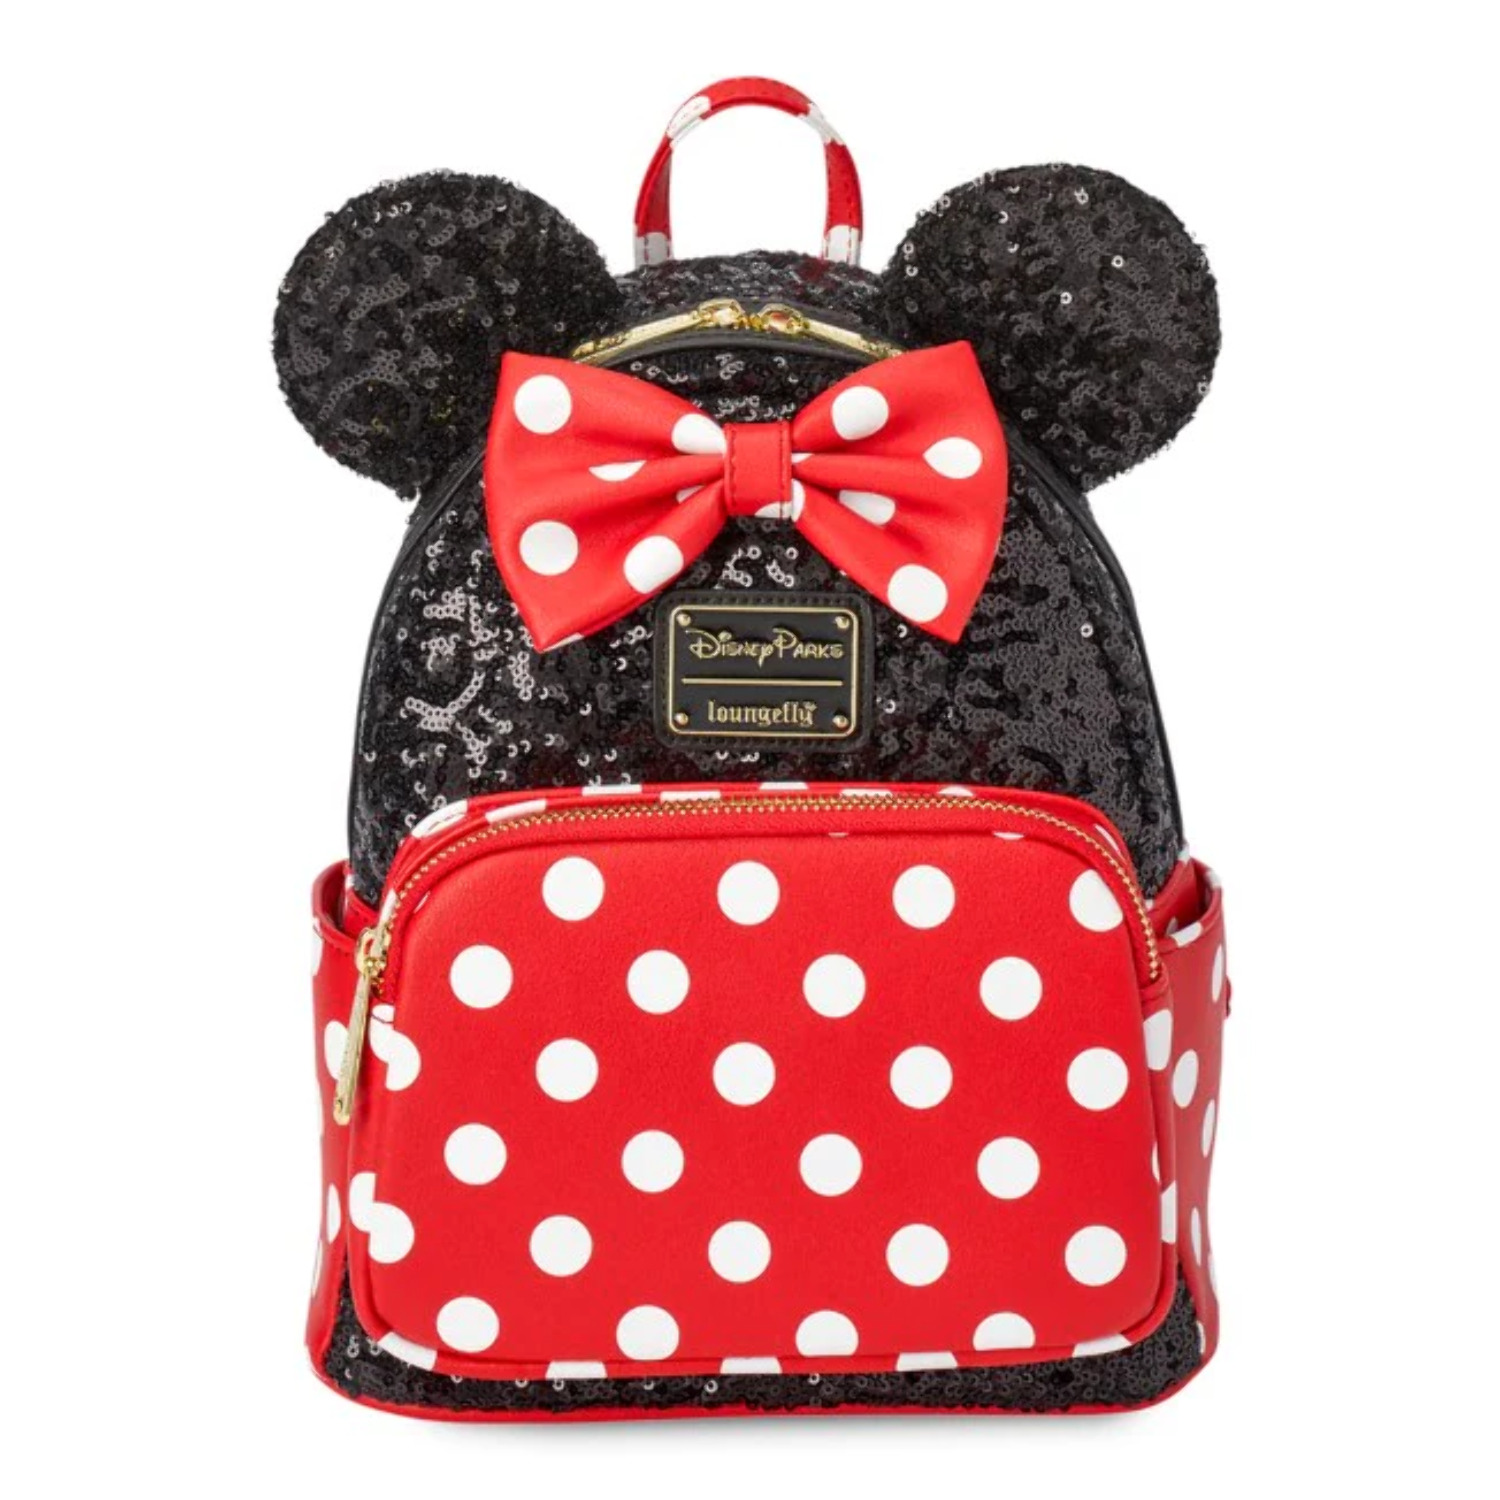 Disney Parks Minnie Sequin And Polka Dot Mini Backpack New With Tag - image 1 of 4